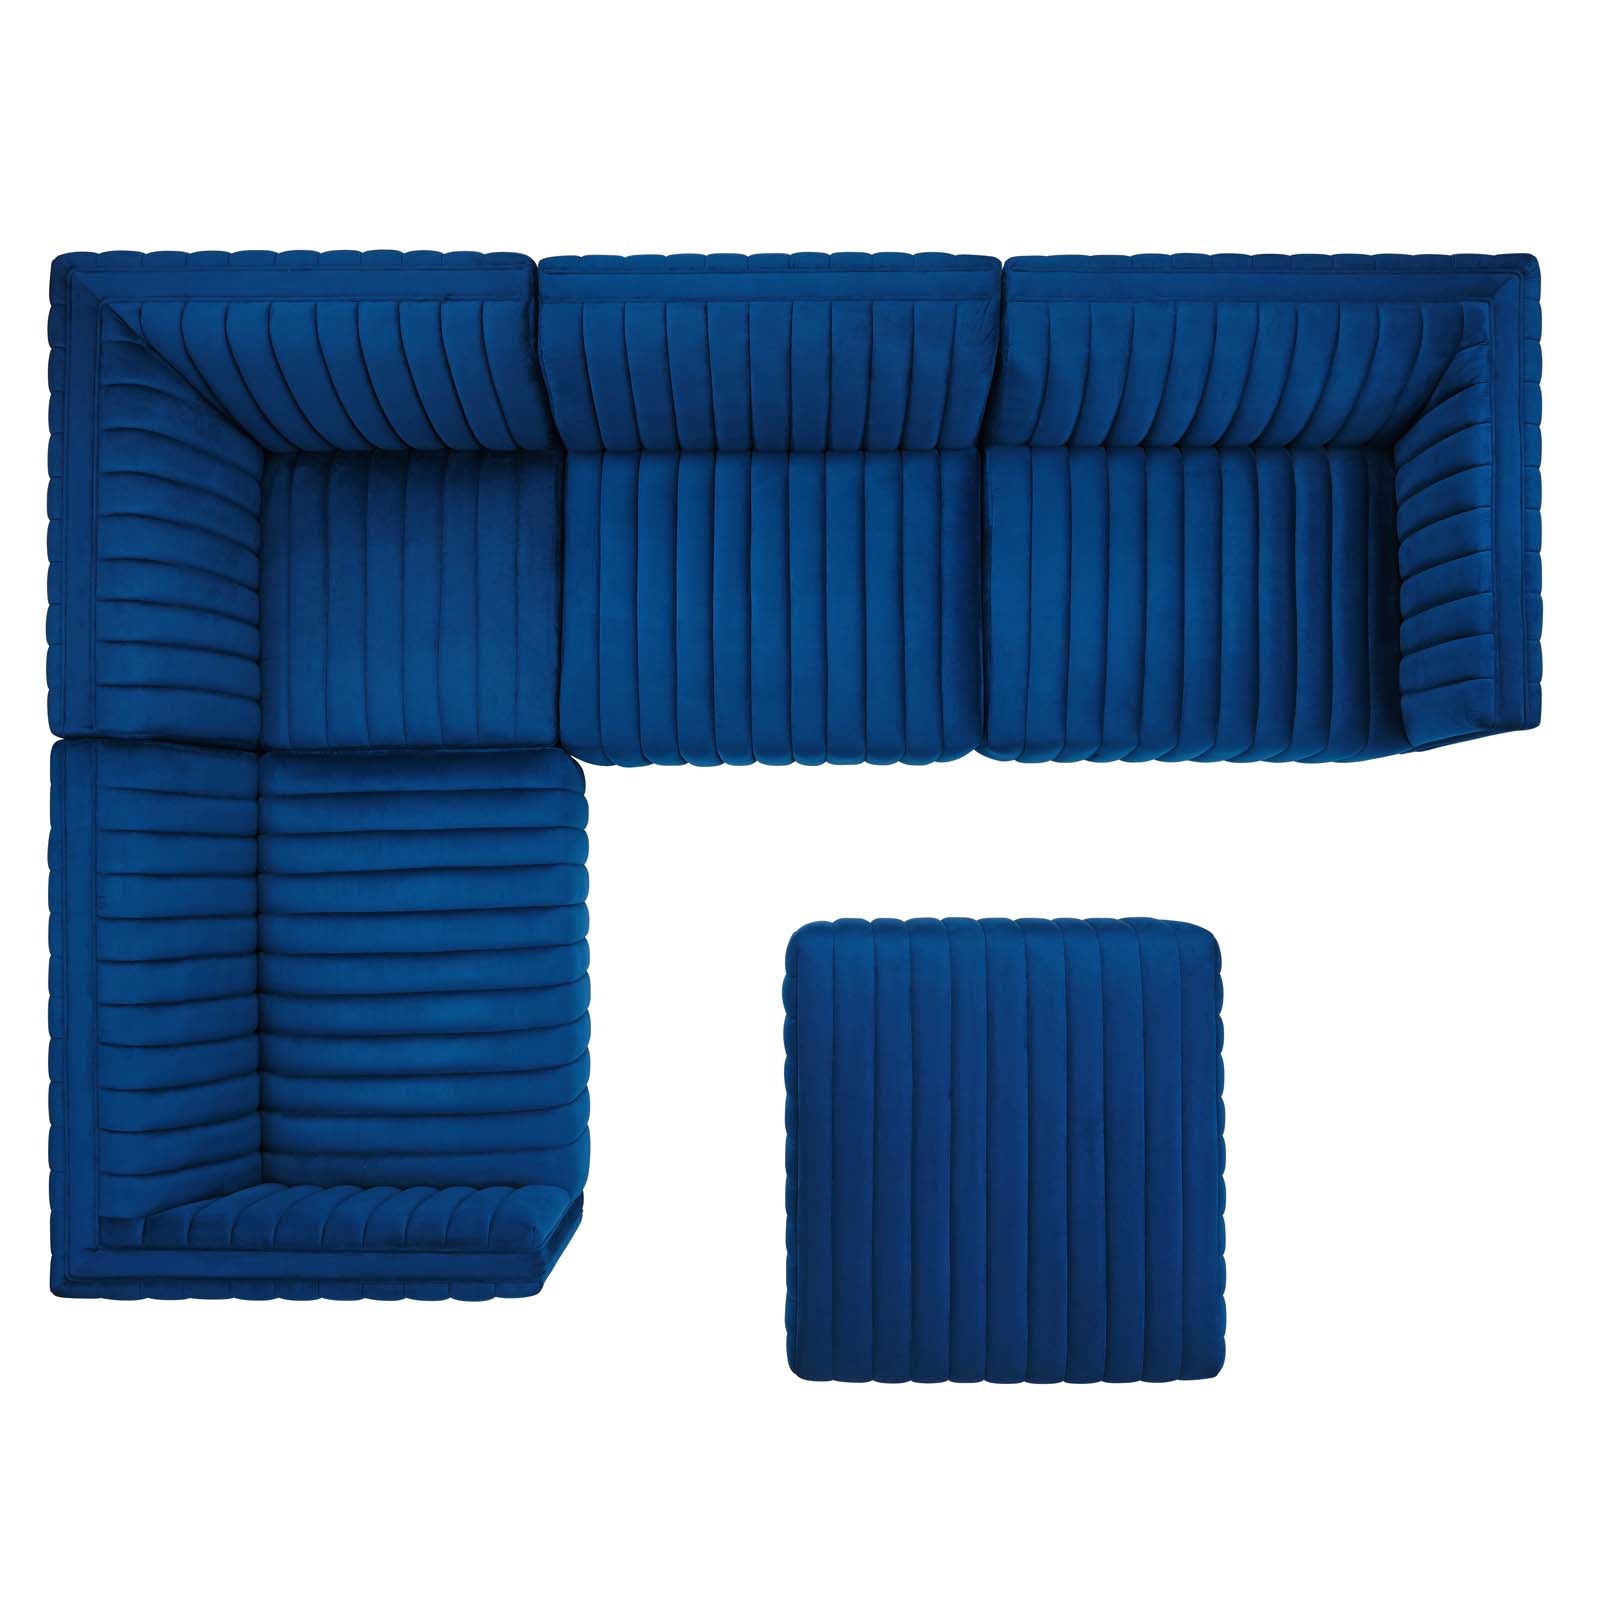 Conjure Channel Tufted Performance Velvet 5-Piece Sectional-Sectional-Modway-Wall2Wall Furnishings